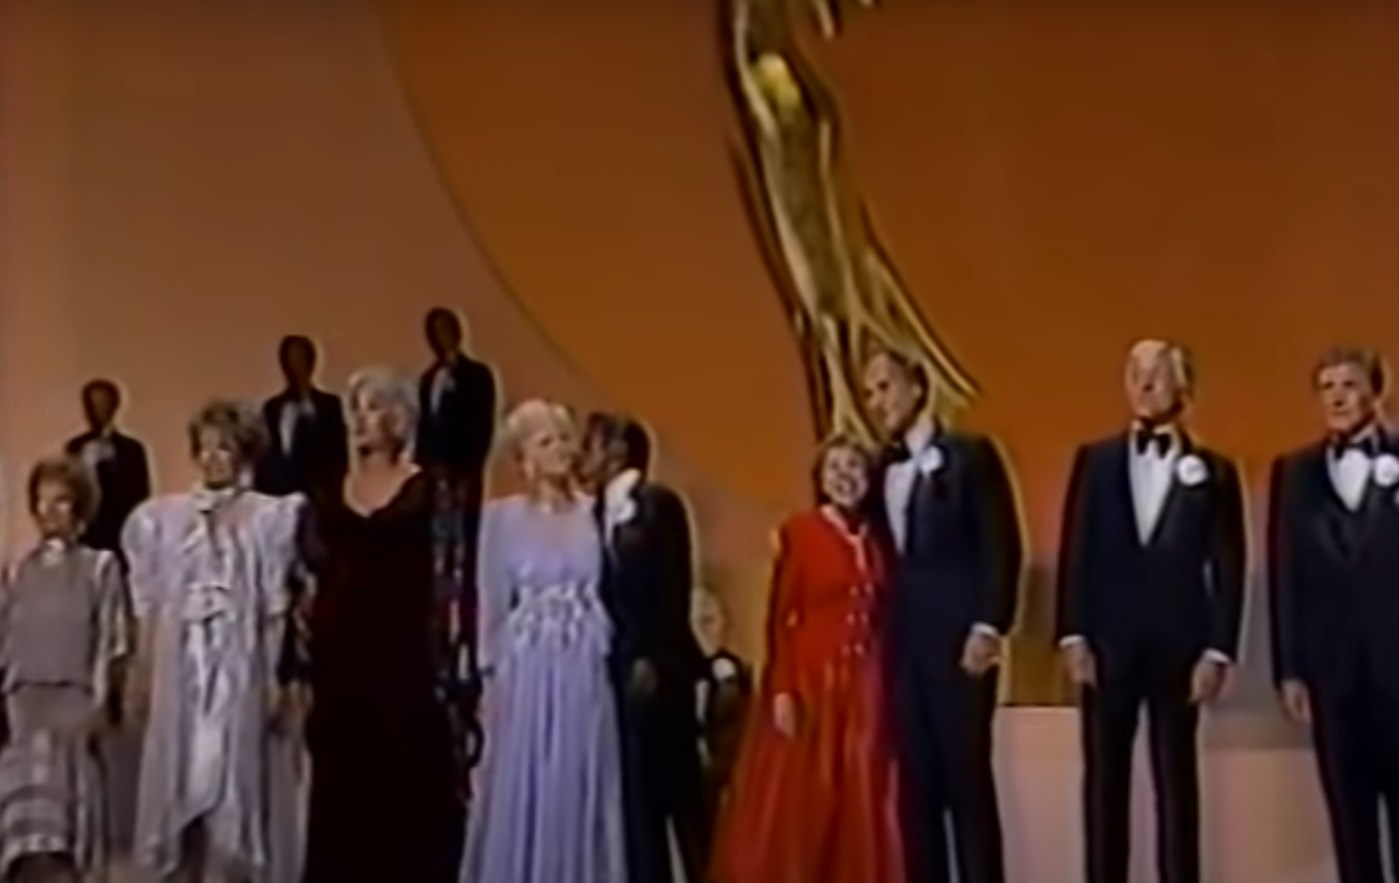 Some old TV stars sing Stephen Sondheim's "Old Friends" at the 1986 Emmys